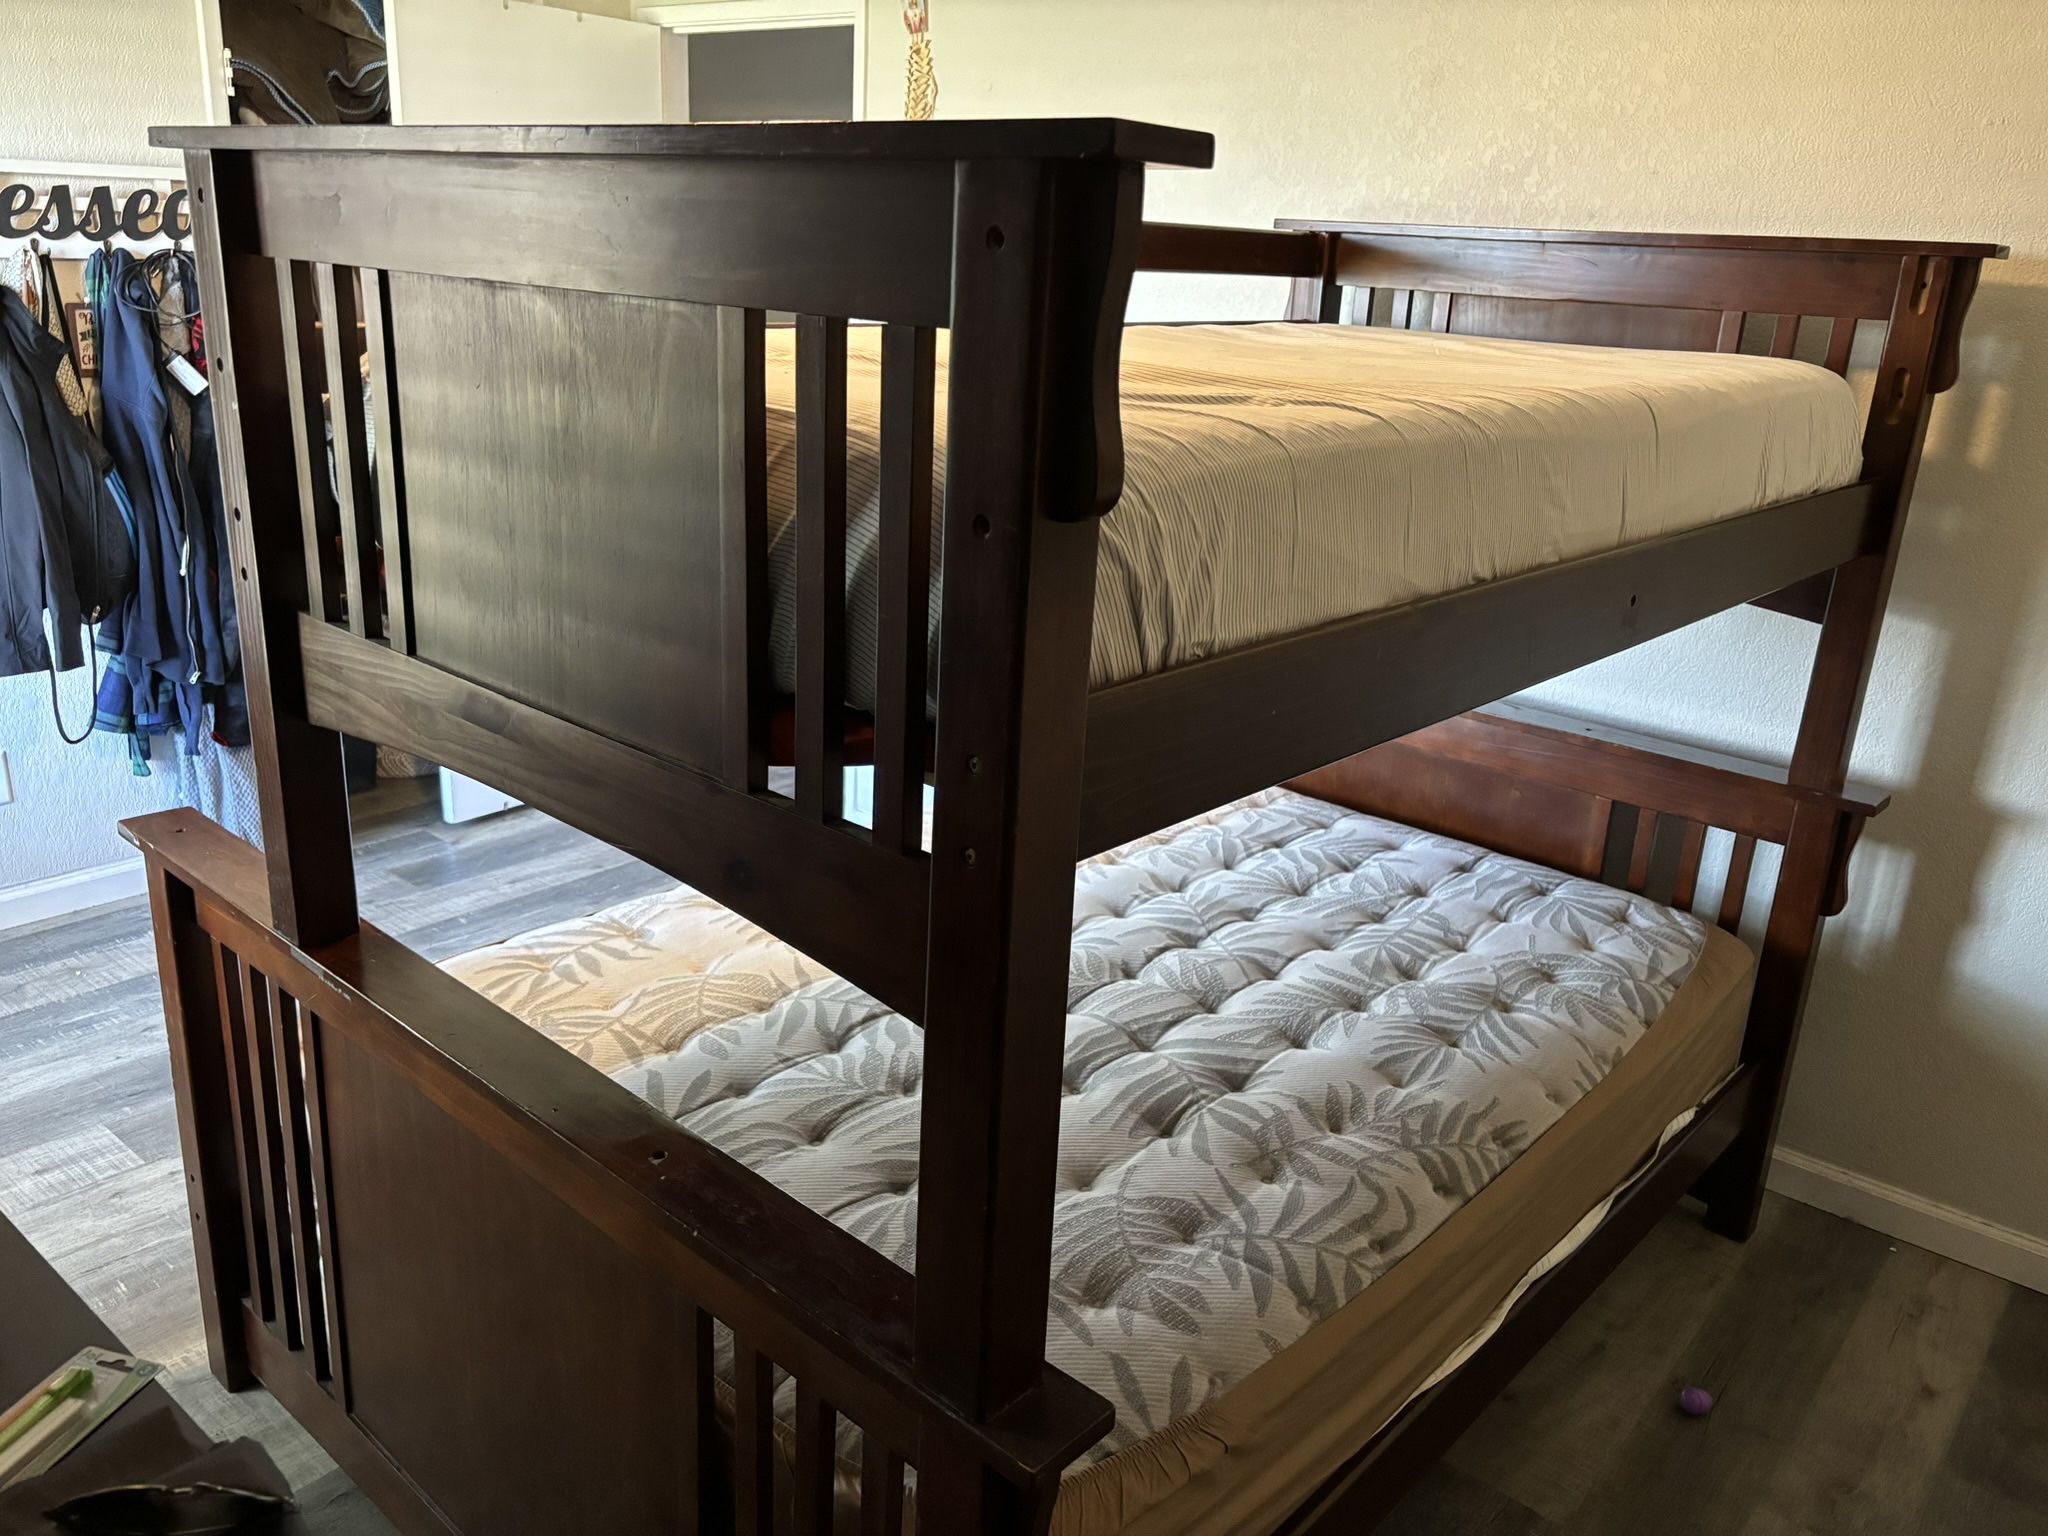 Bunk Bed Twin Over Full $180